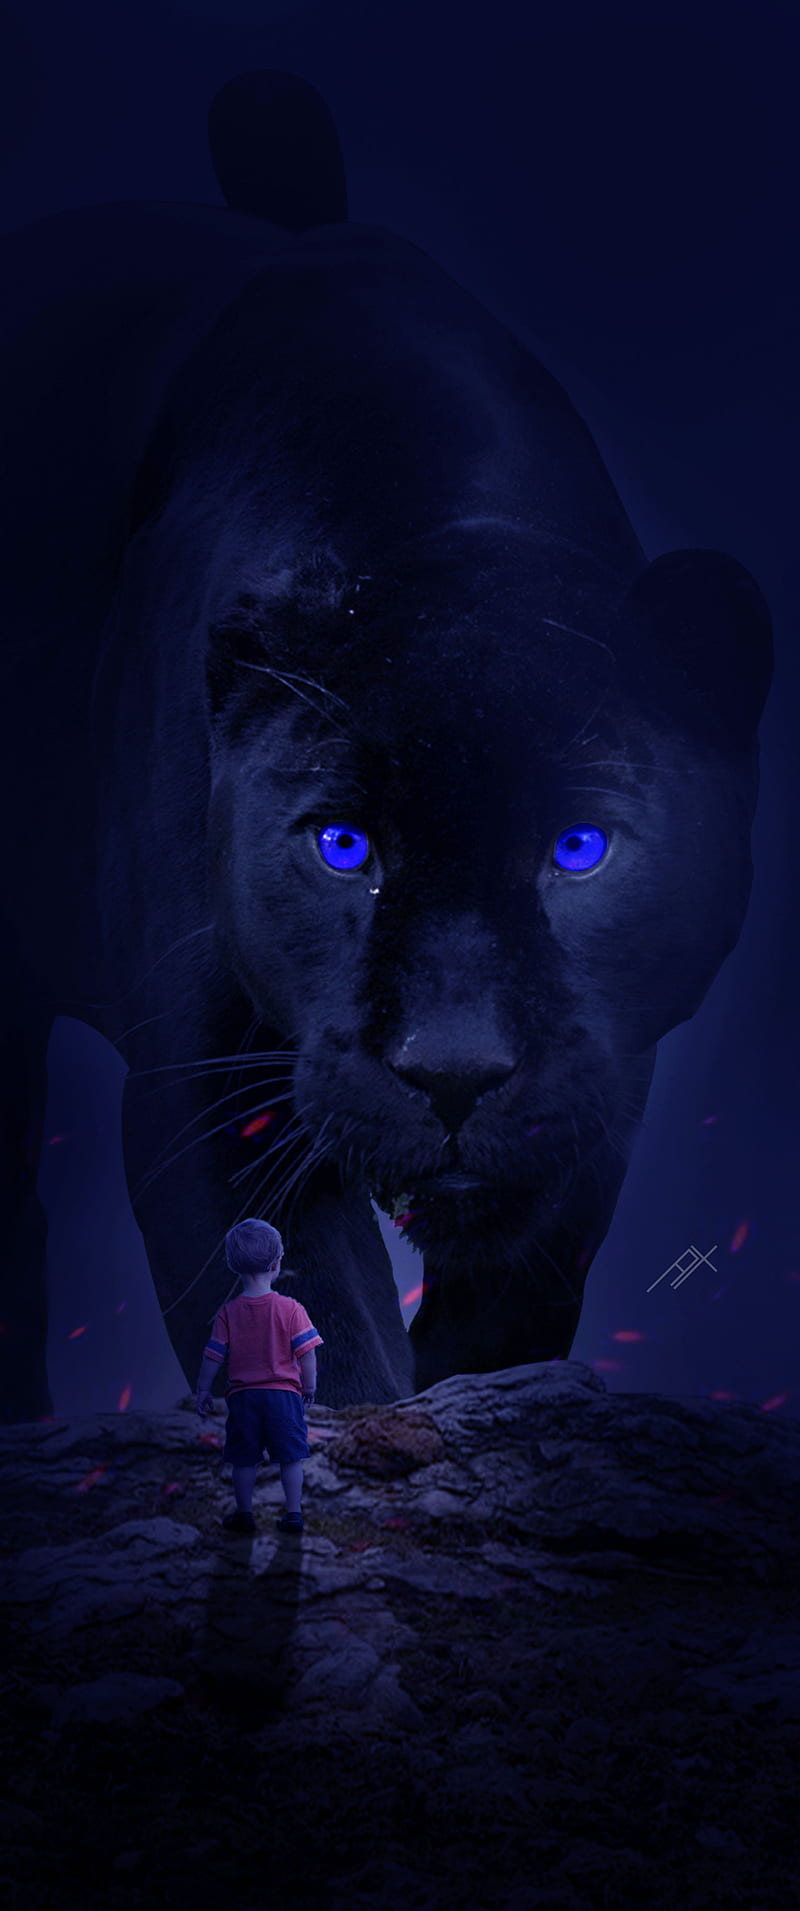 Face the fear, black, dark, fear, haunted, night, panther, HD phone wallpaper